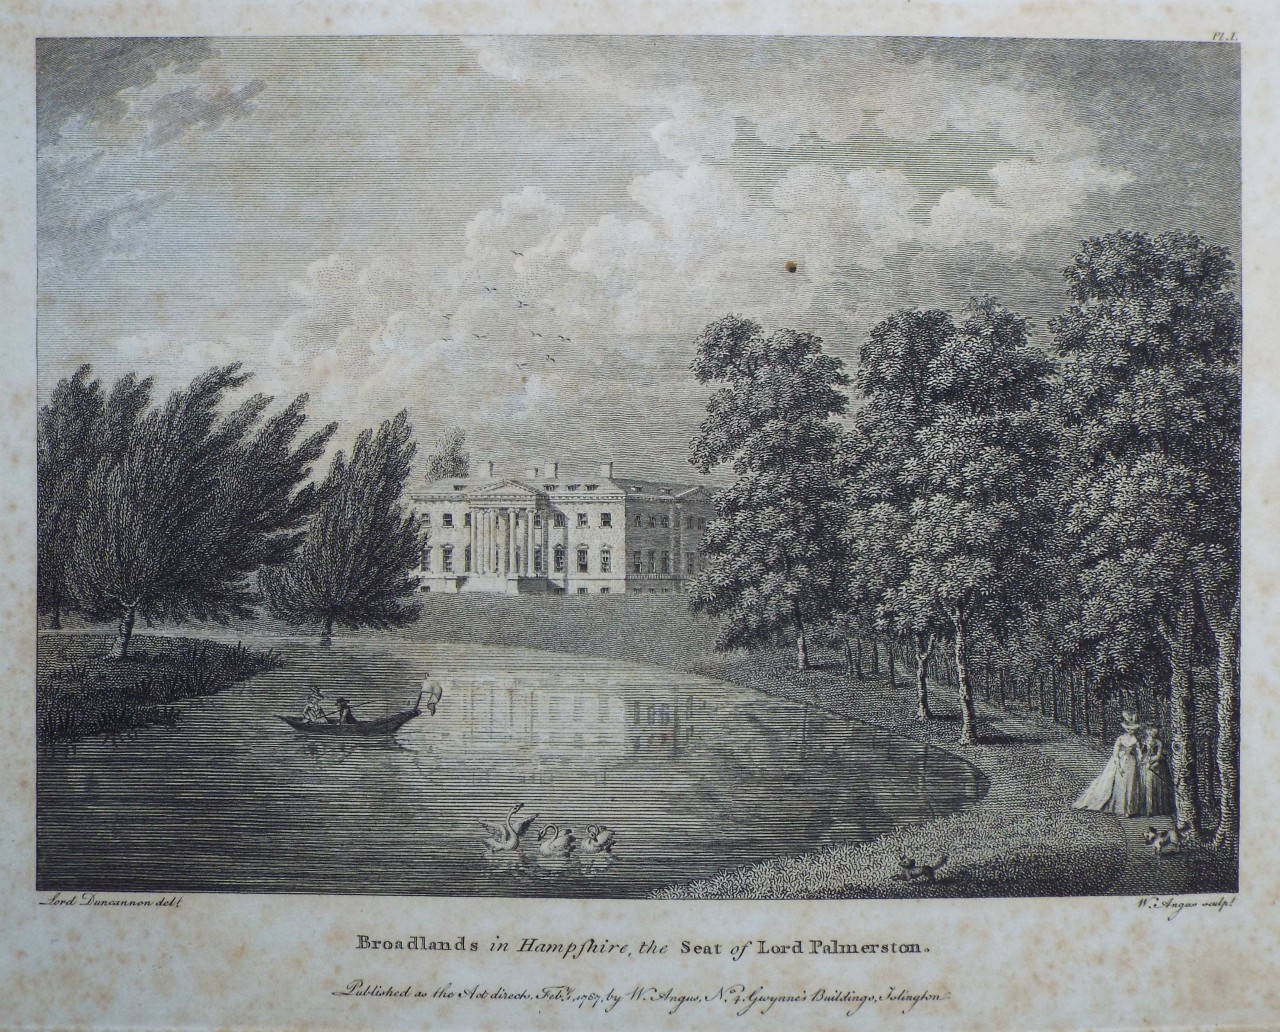 Print - Broadlands in Hampshire, the Seat of Lord Palmerston. - Angus